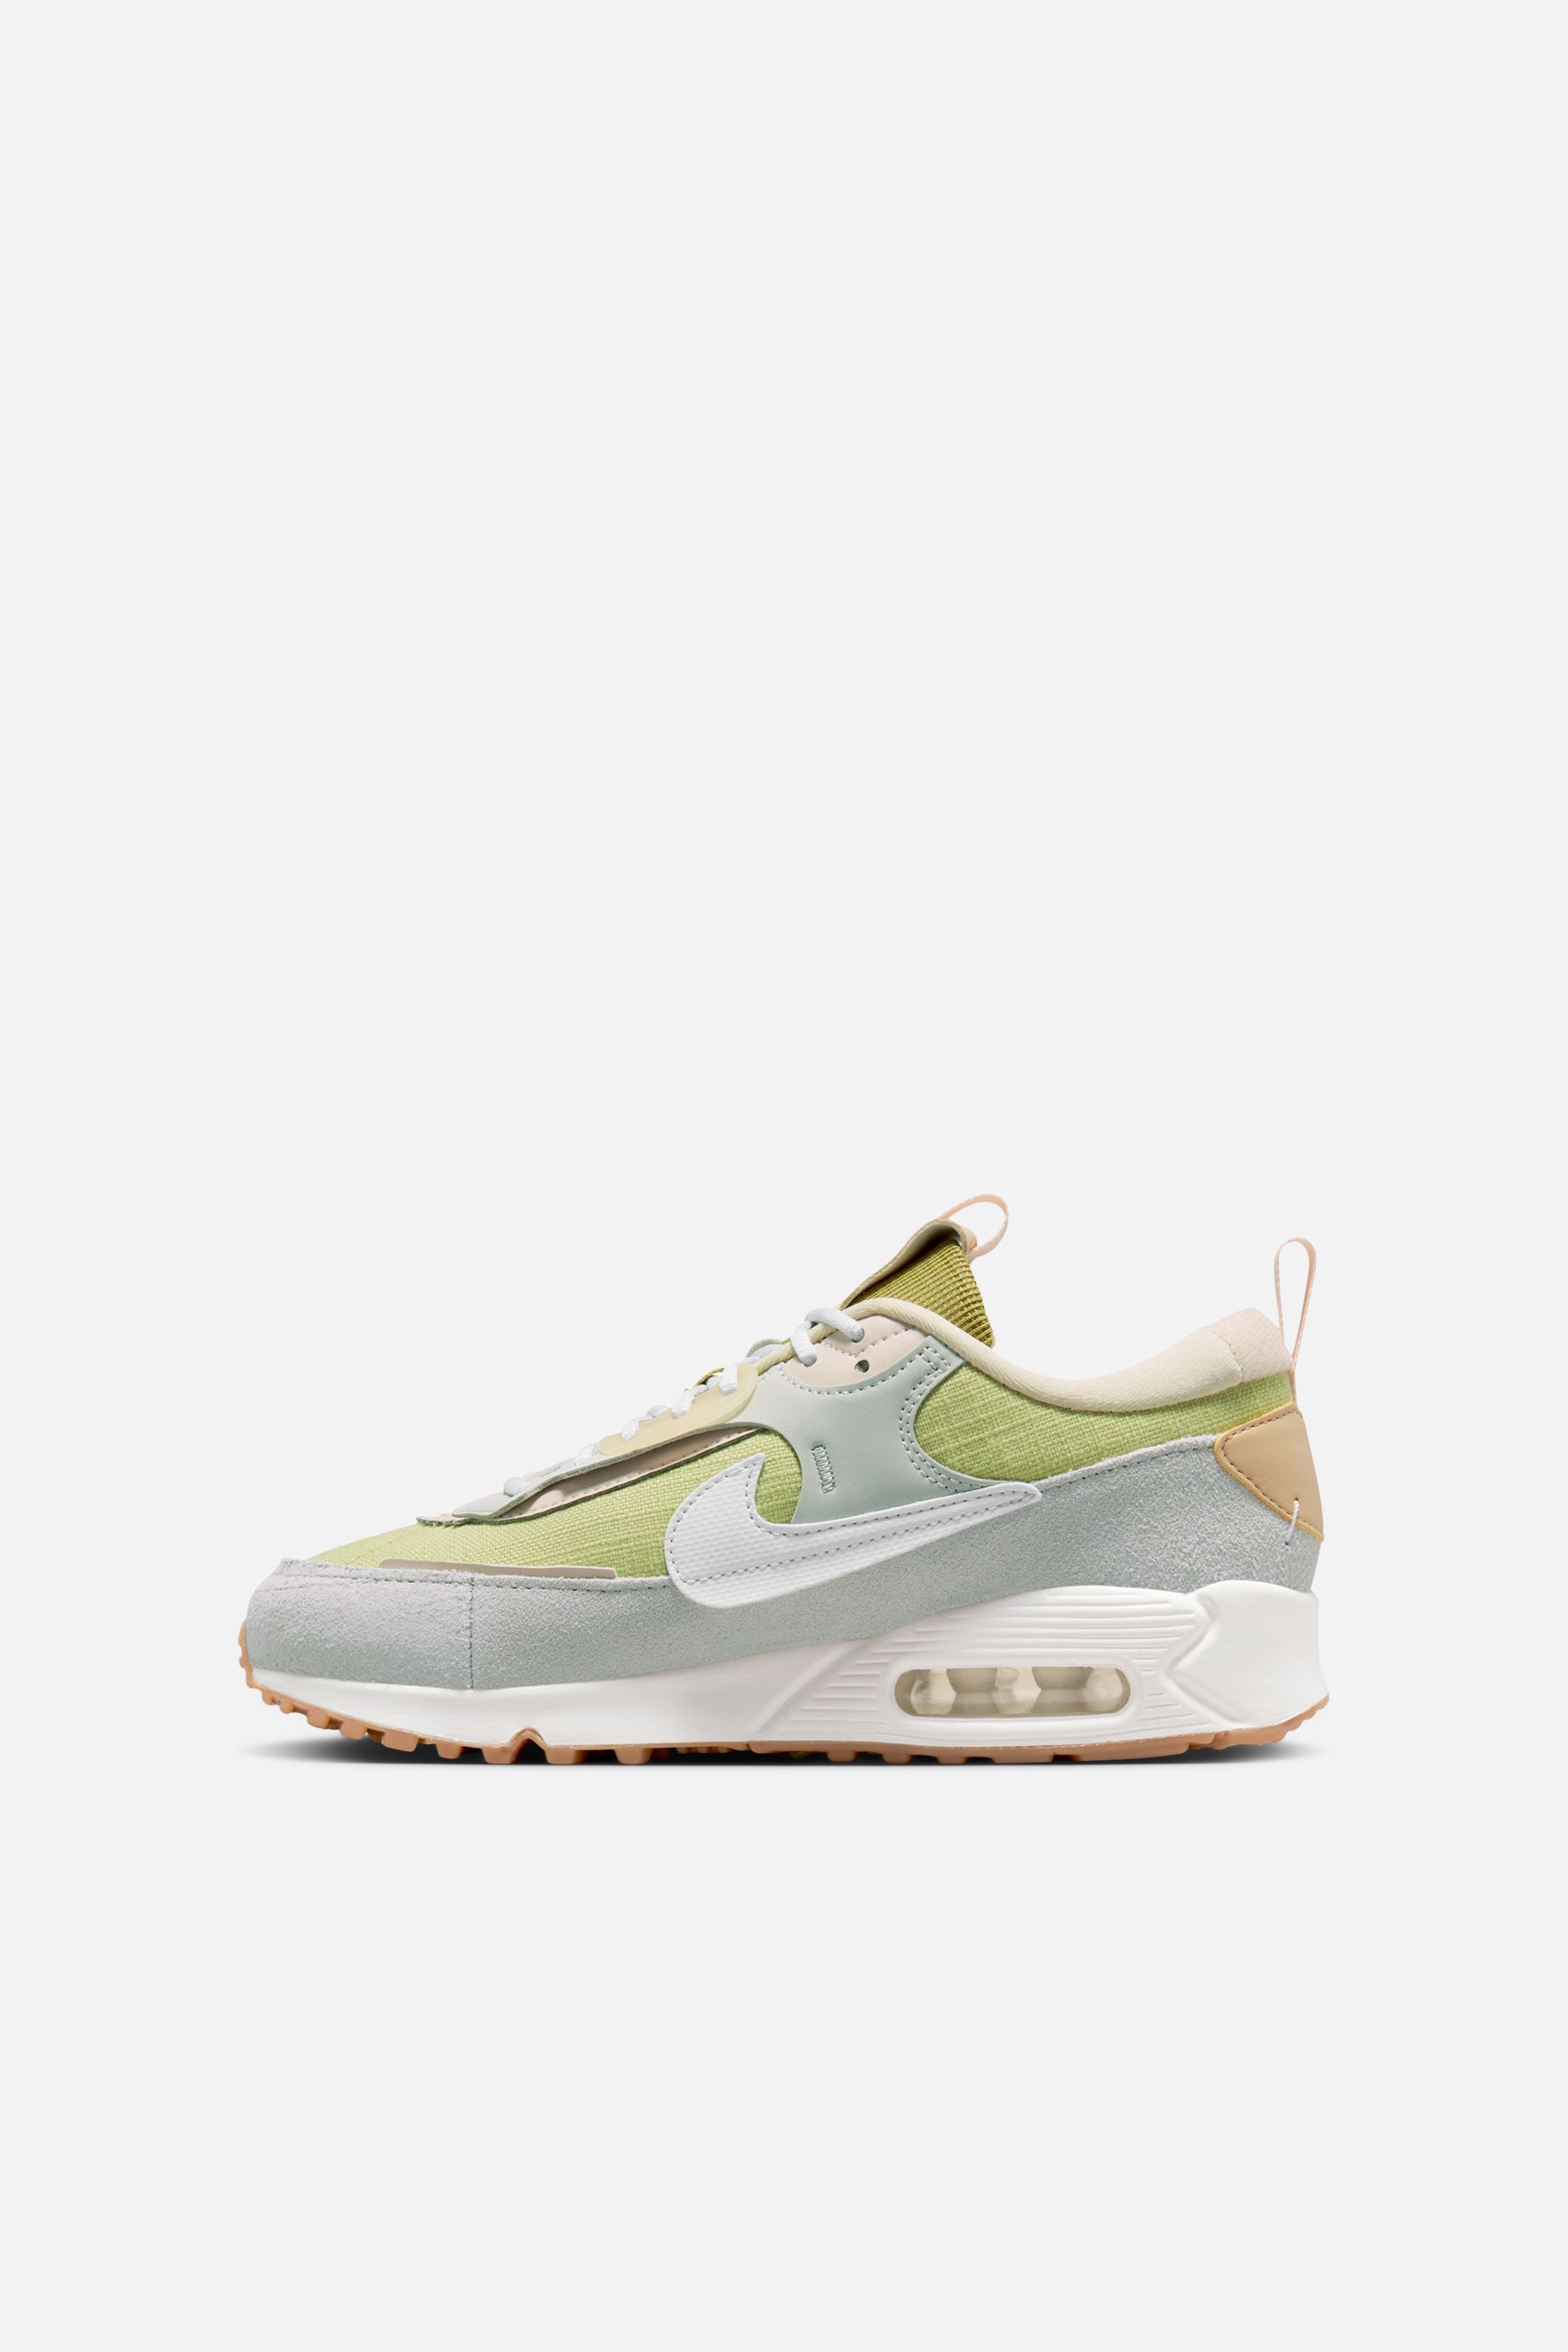 Nike Women's Air Max 90 Futura Sneakers in Buff Gold/Summit White | Size 6 | Bandier